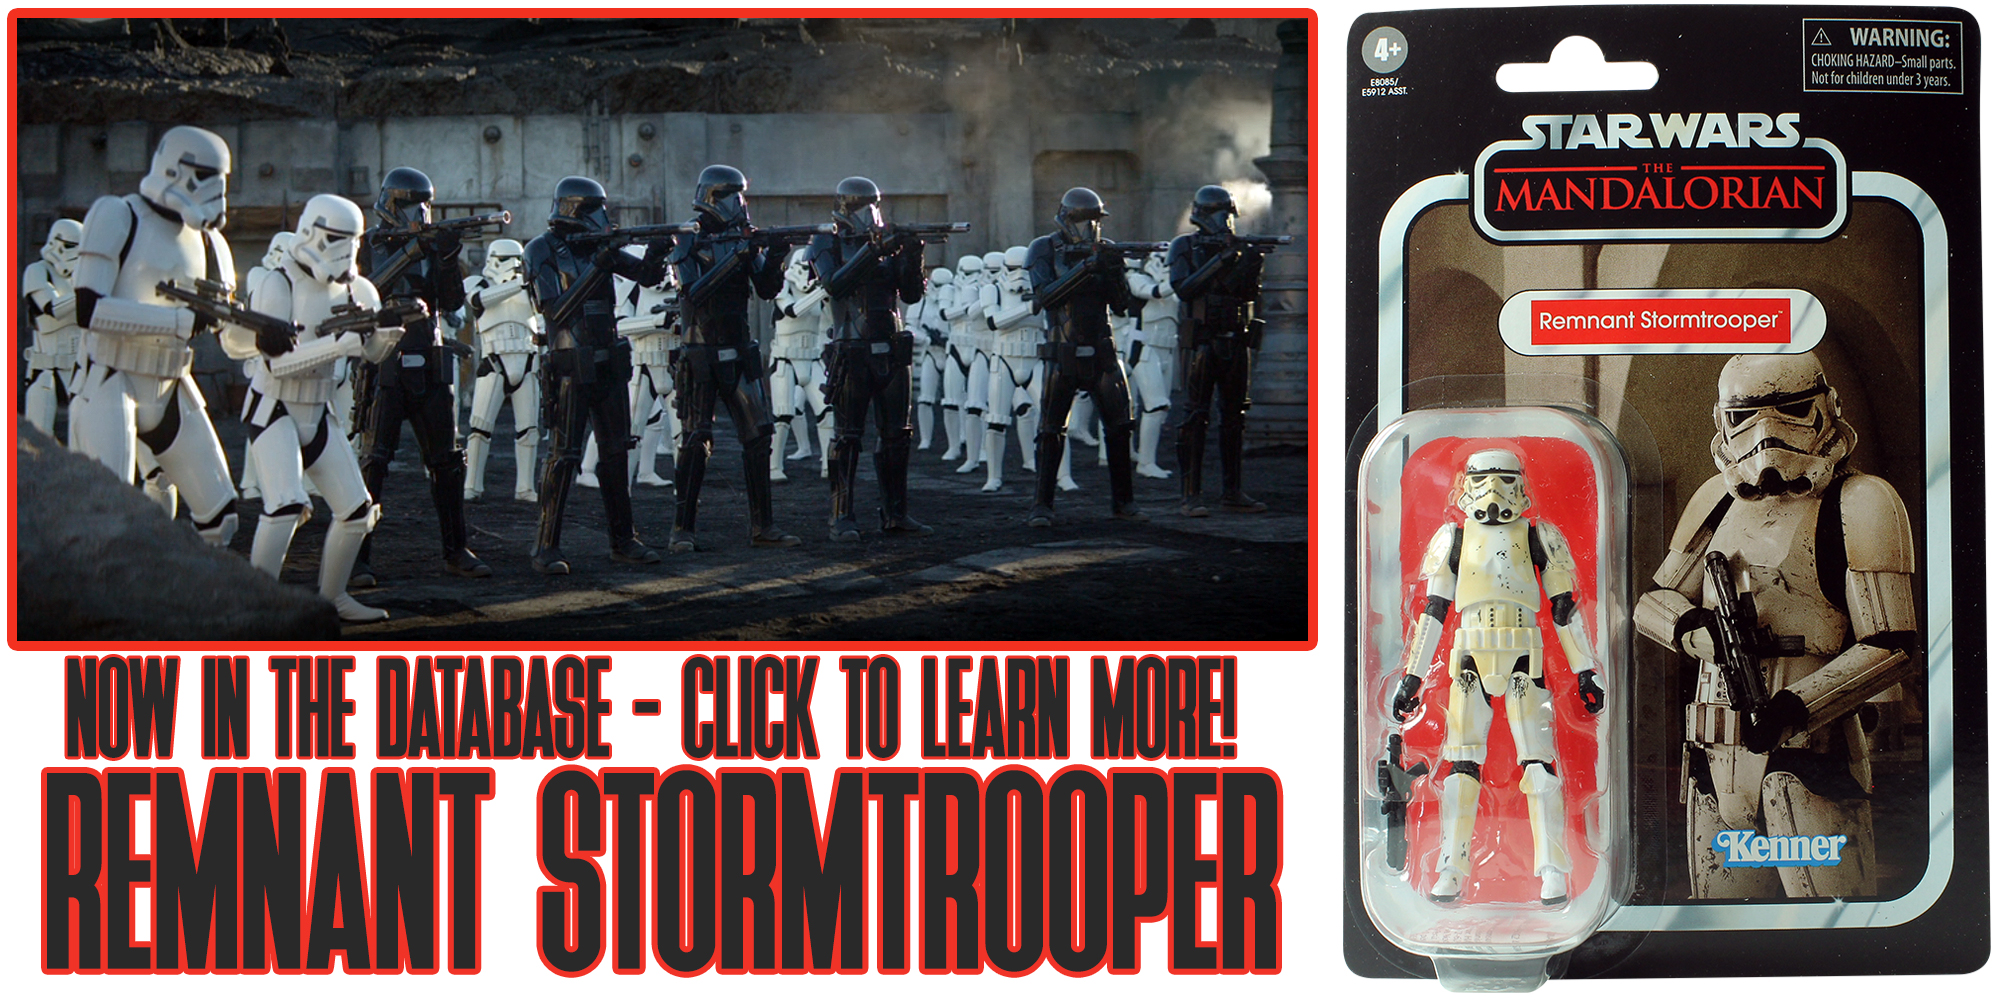 New In The Database: TVC Remnant Stormtrooper